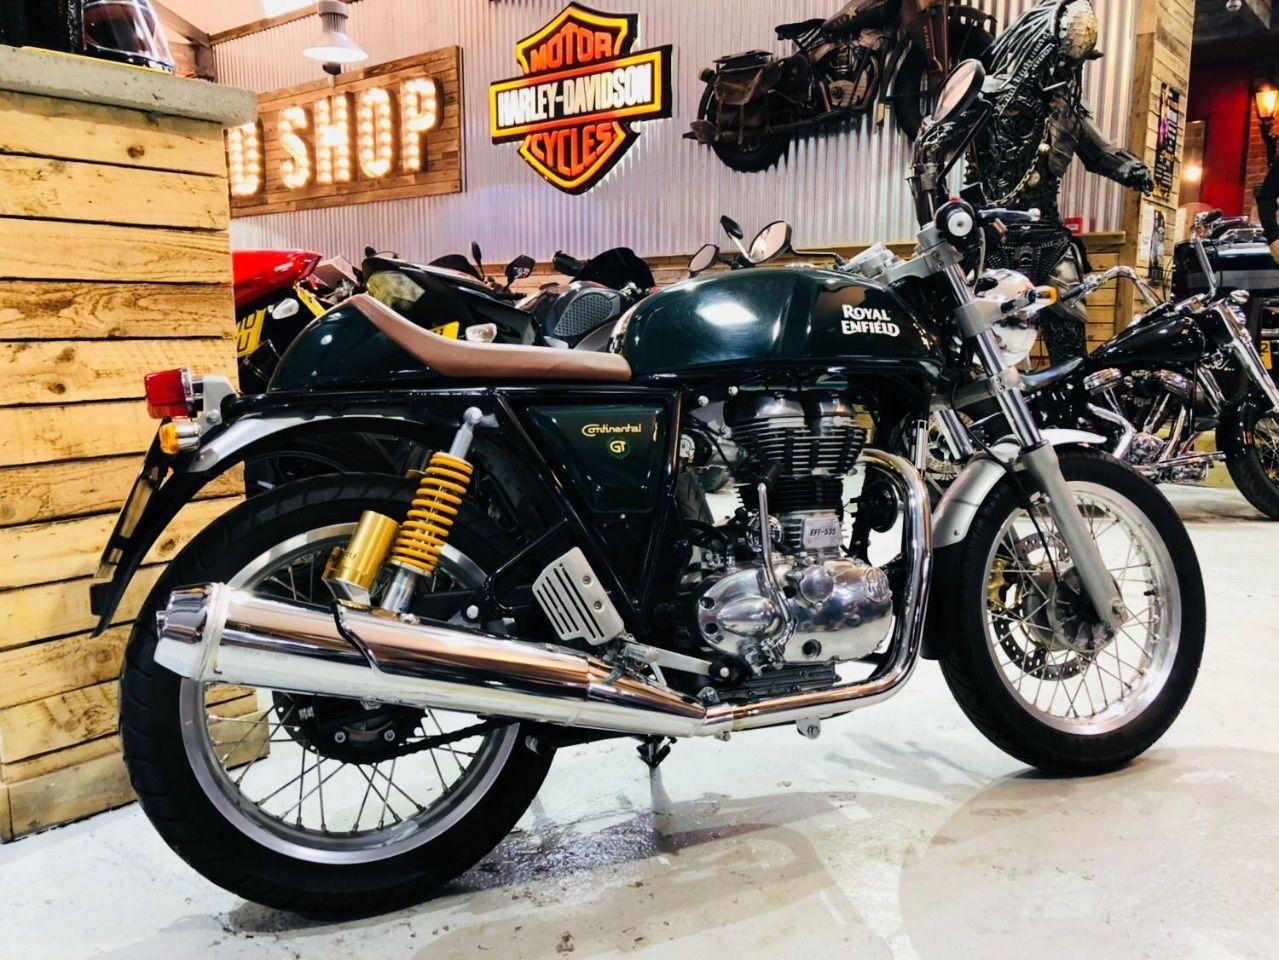 Used Royal Enfield Continental GT Bikes, Second Hand Royal Enfield